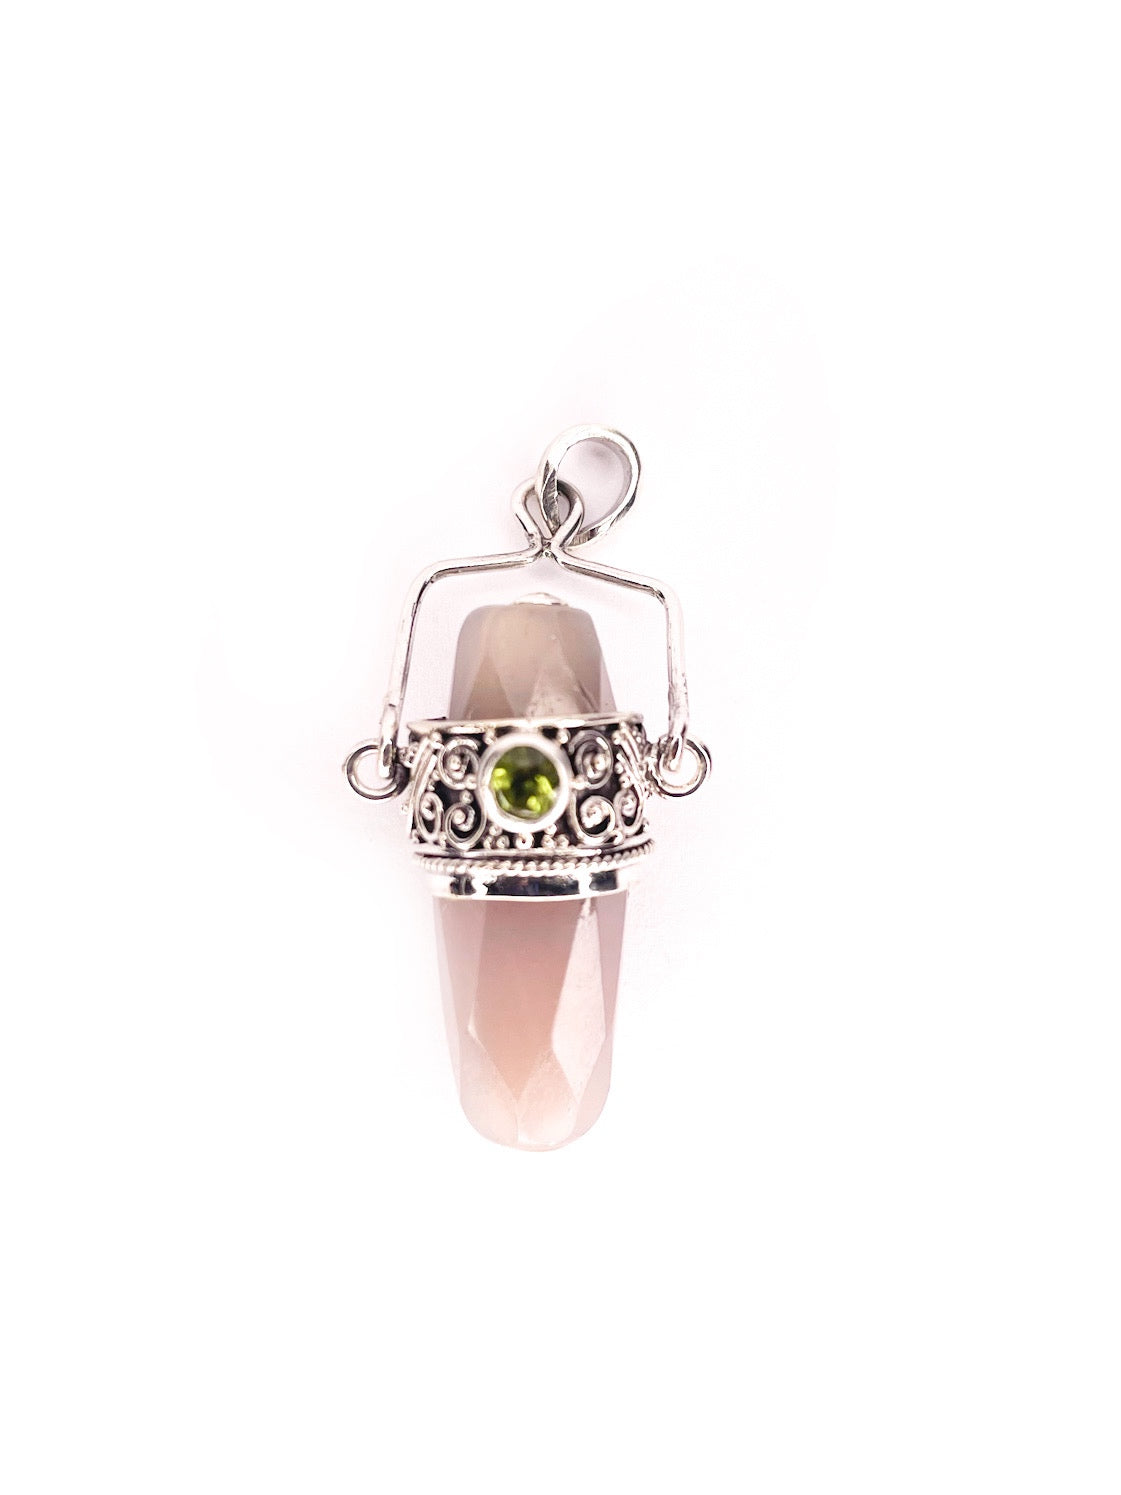 Faceted tourmaline pendant with peridot in silver setting